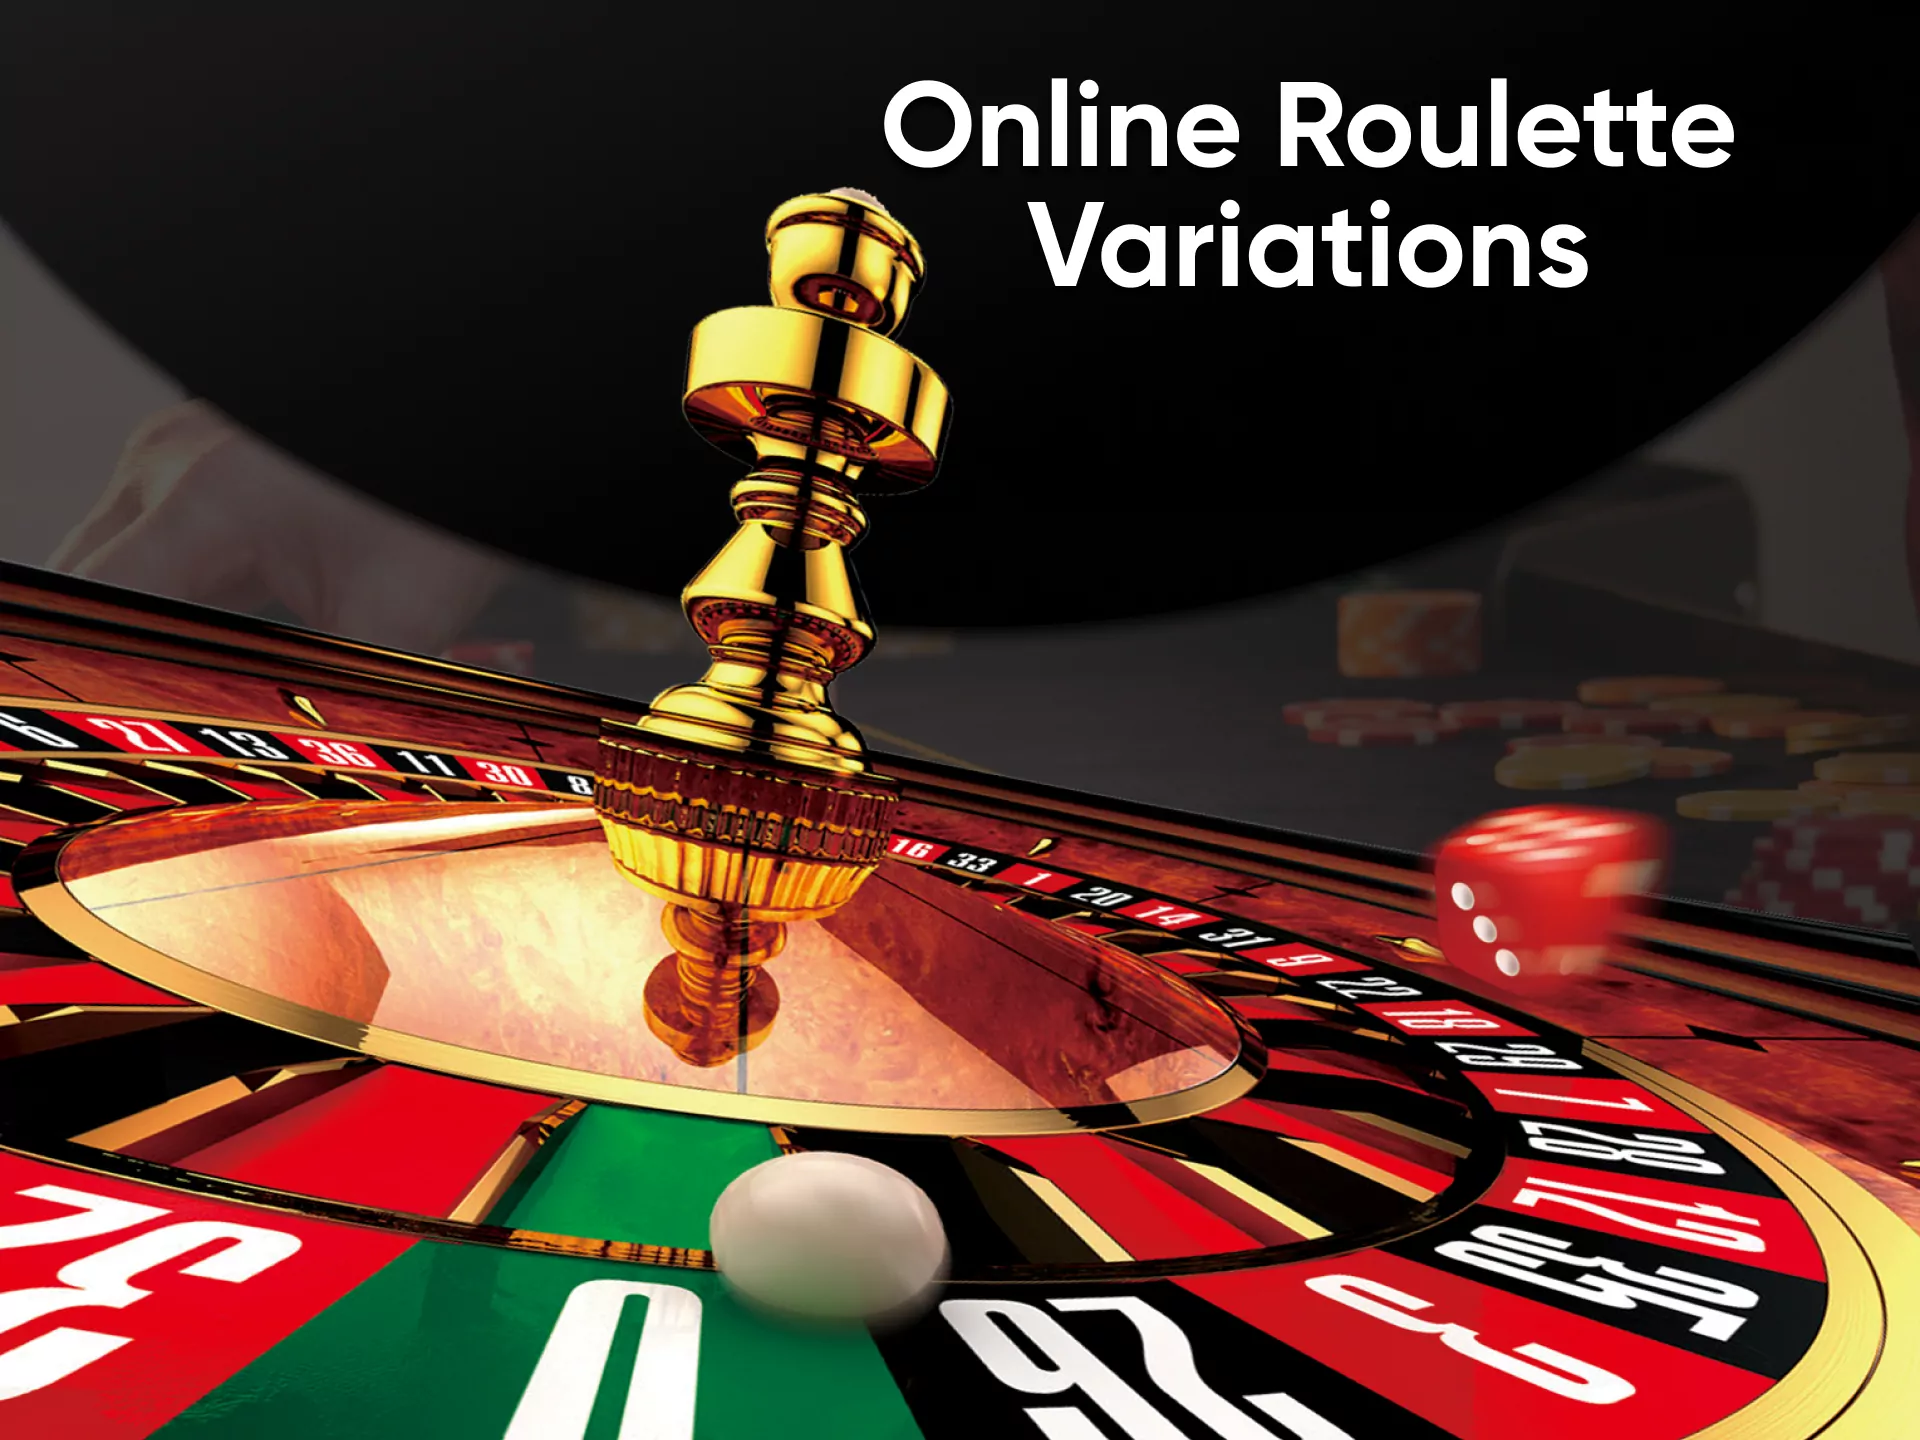 There are many variations of online roulette.